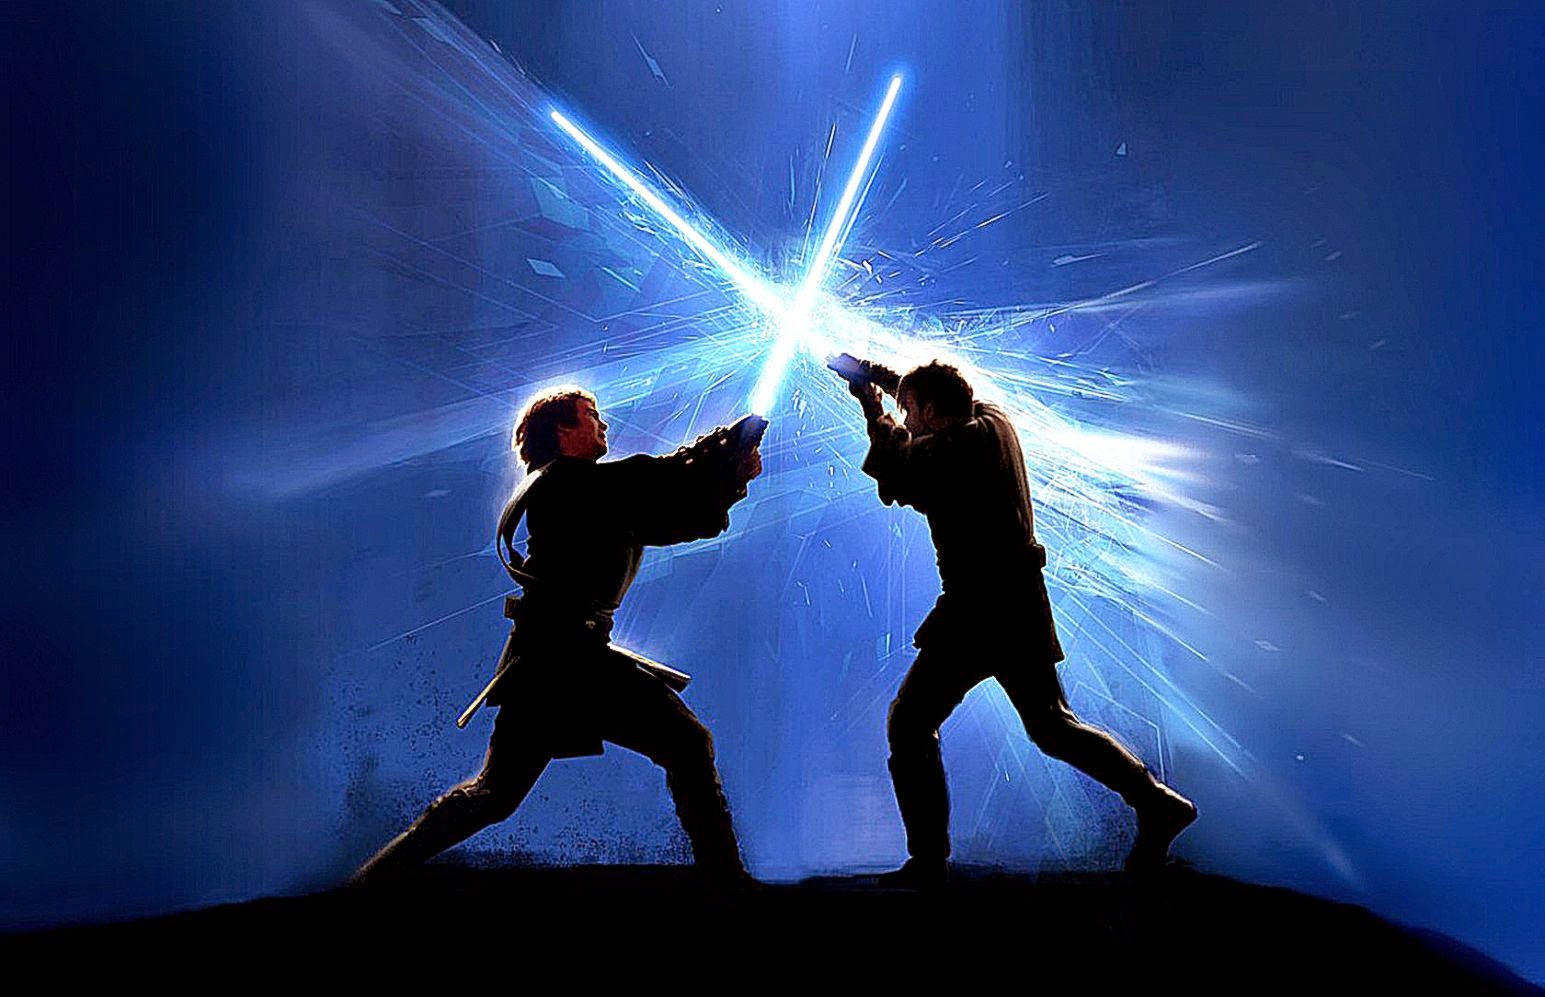 Star Wars Every Lightsaber Battle Ranked From Worst To Best Goliath